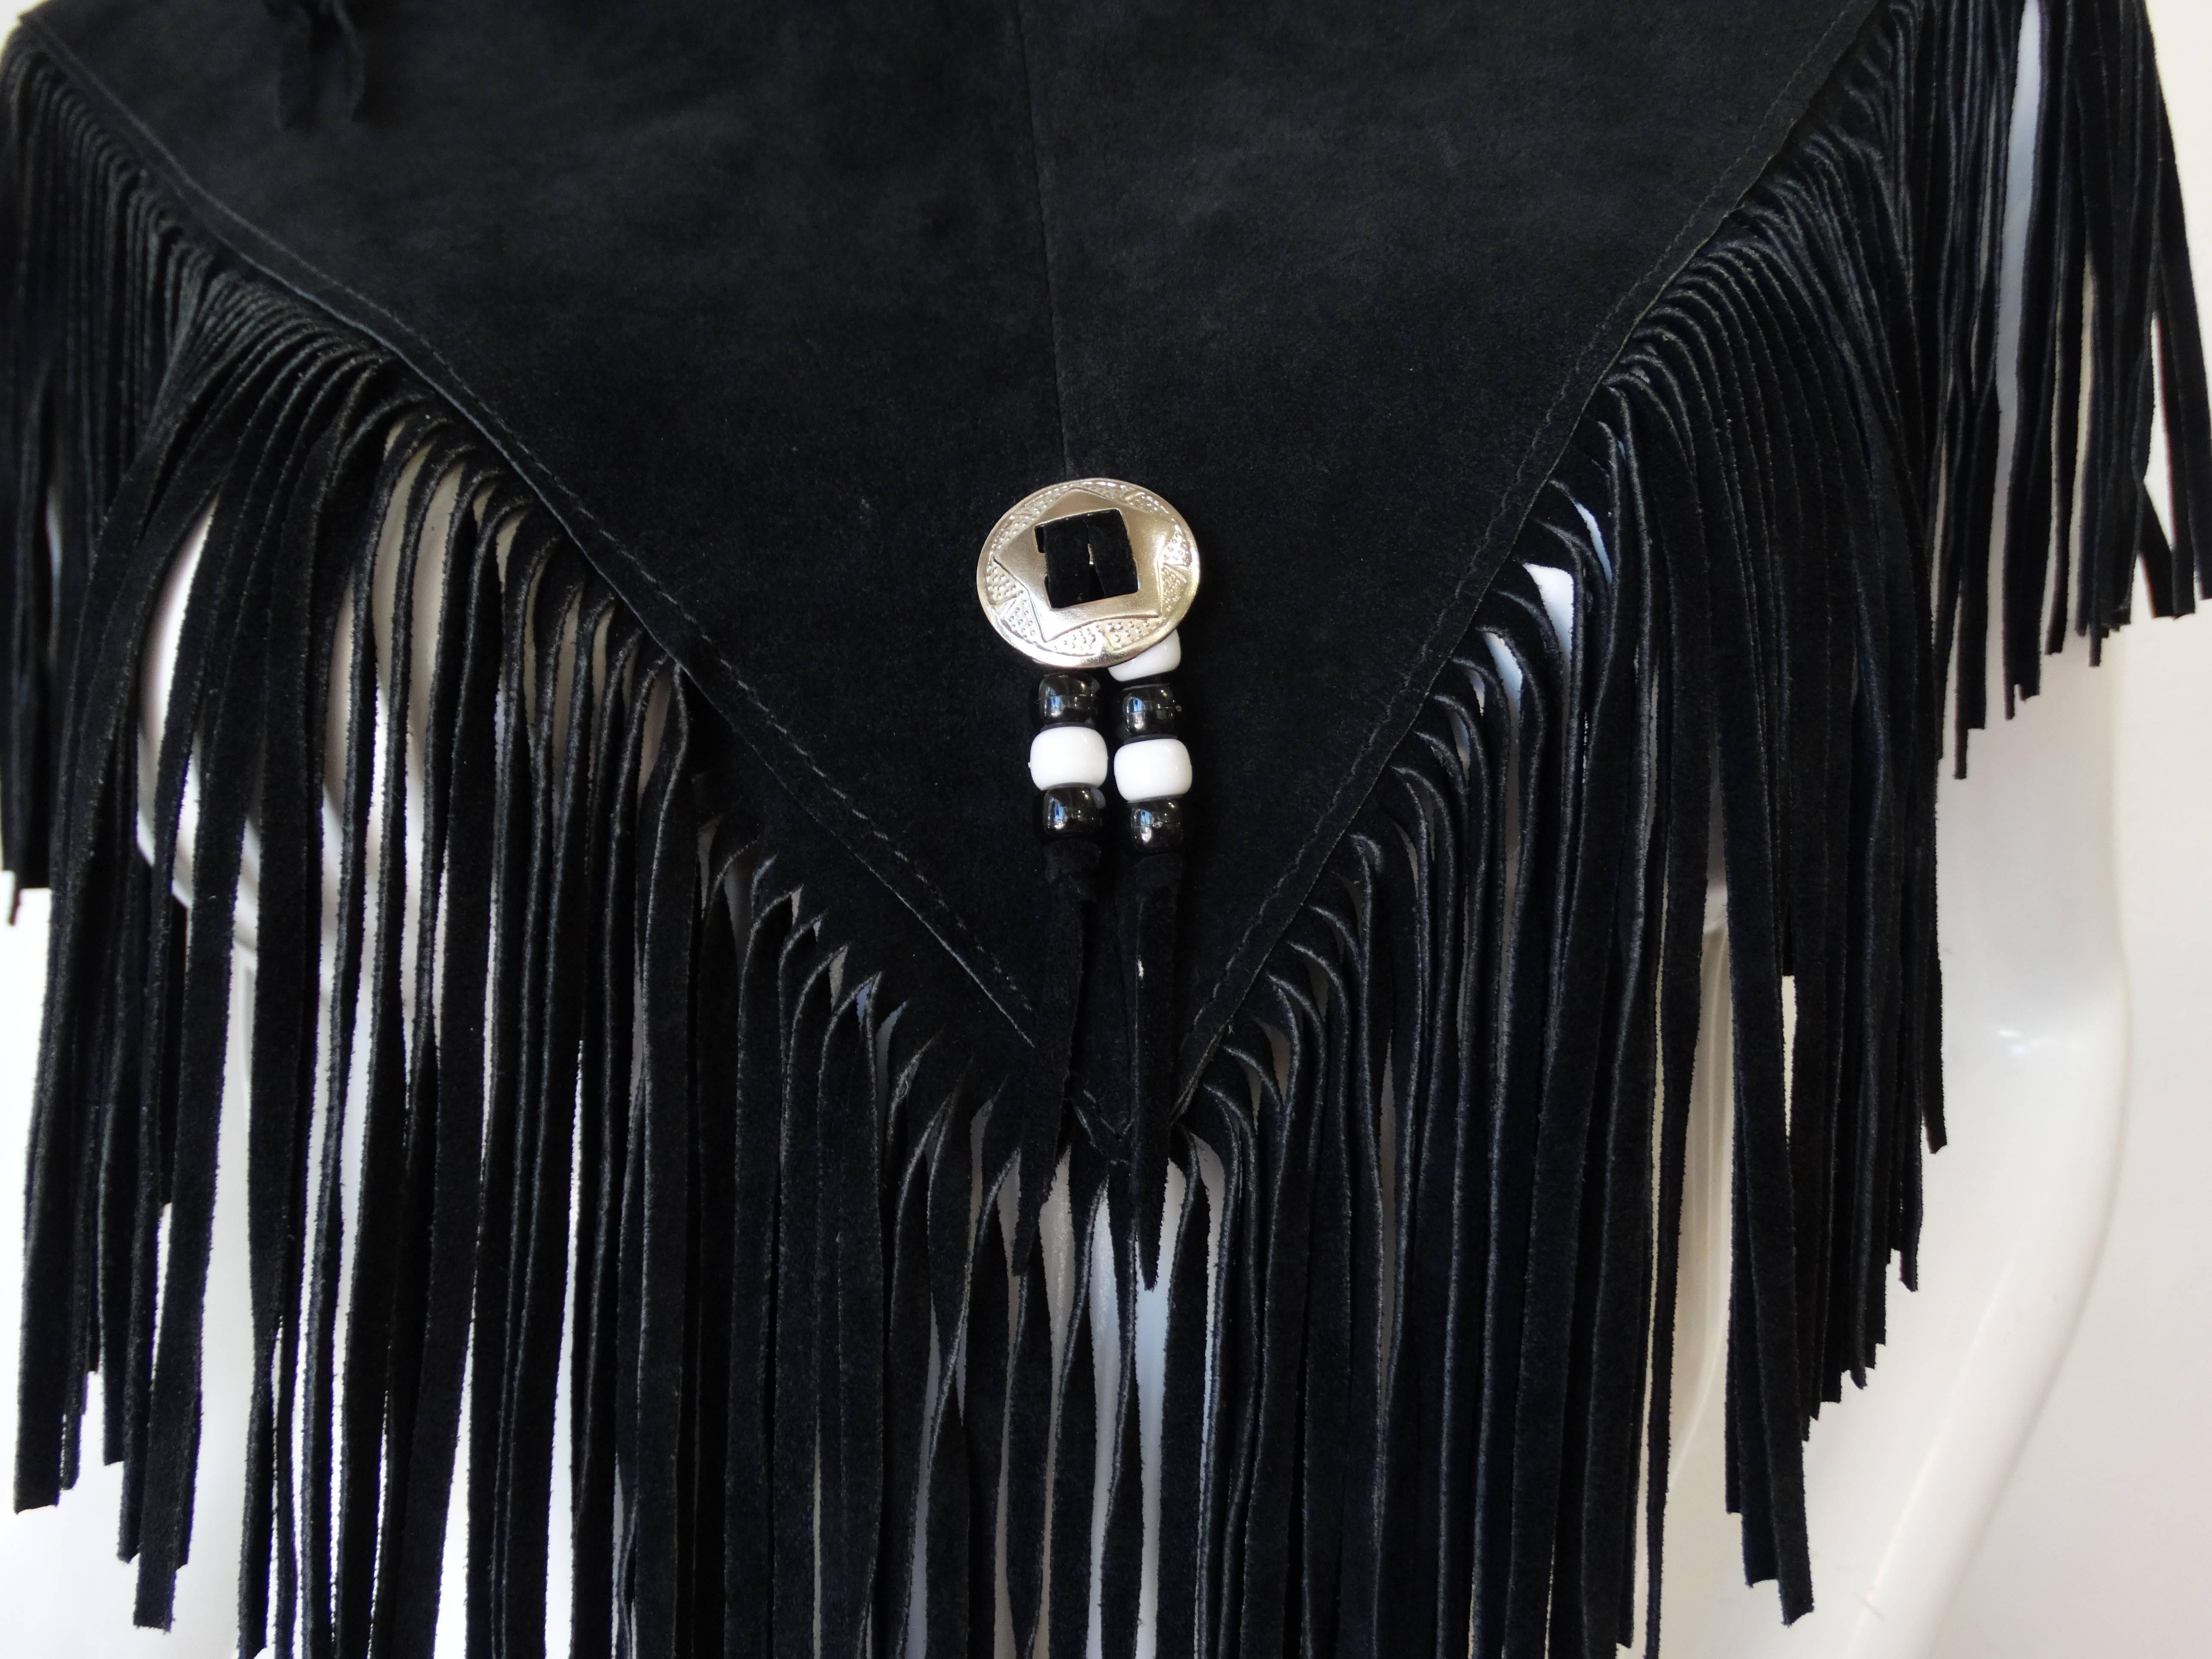 The perfect piece for your upcoming festival wardrobe! Made of a soft black suede. Yoke silhouette- sits comfortably on the shoulders. Long fringe trim, accented with silver concho charms and black and white beads. Pair with a bralette and some